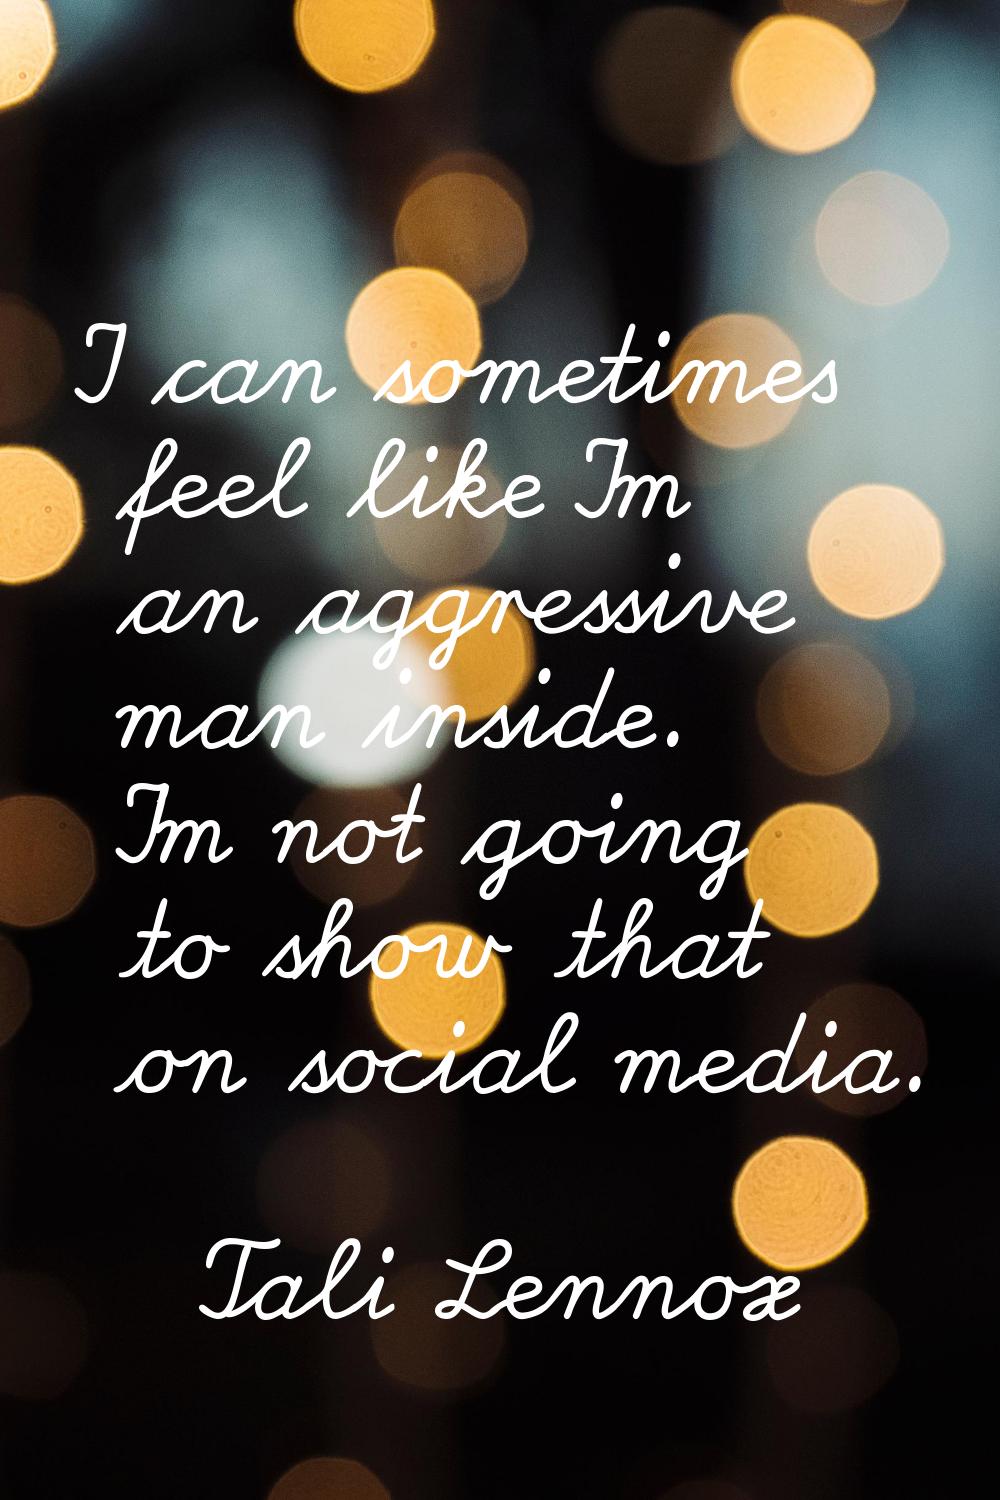 I can sometimes feel like I'm an aggressive man inside. I'm not going to show that on social media.